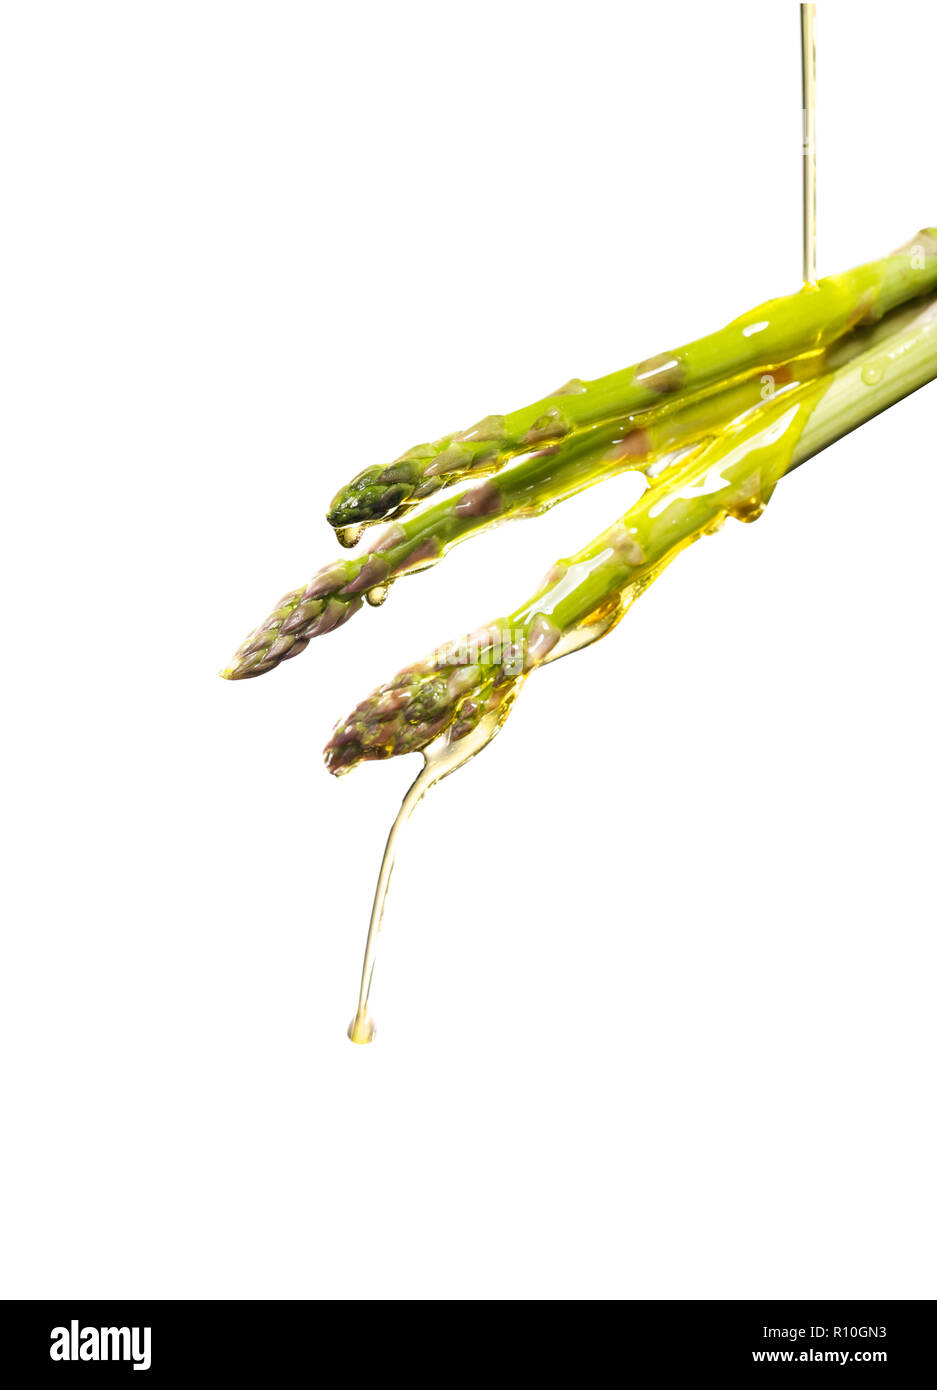 Oil pouring on asparagus spears, plain background Stock Photo